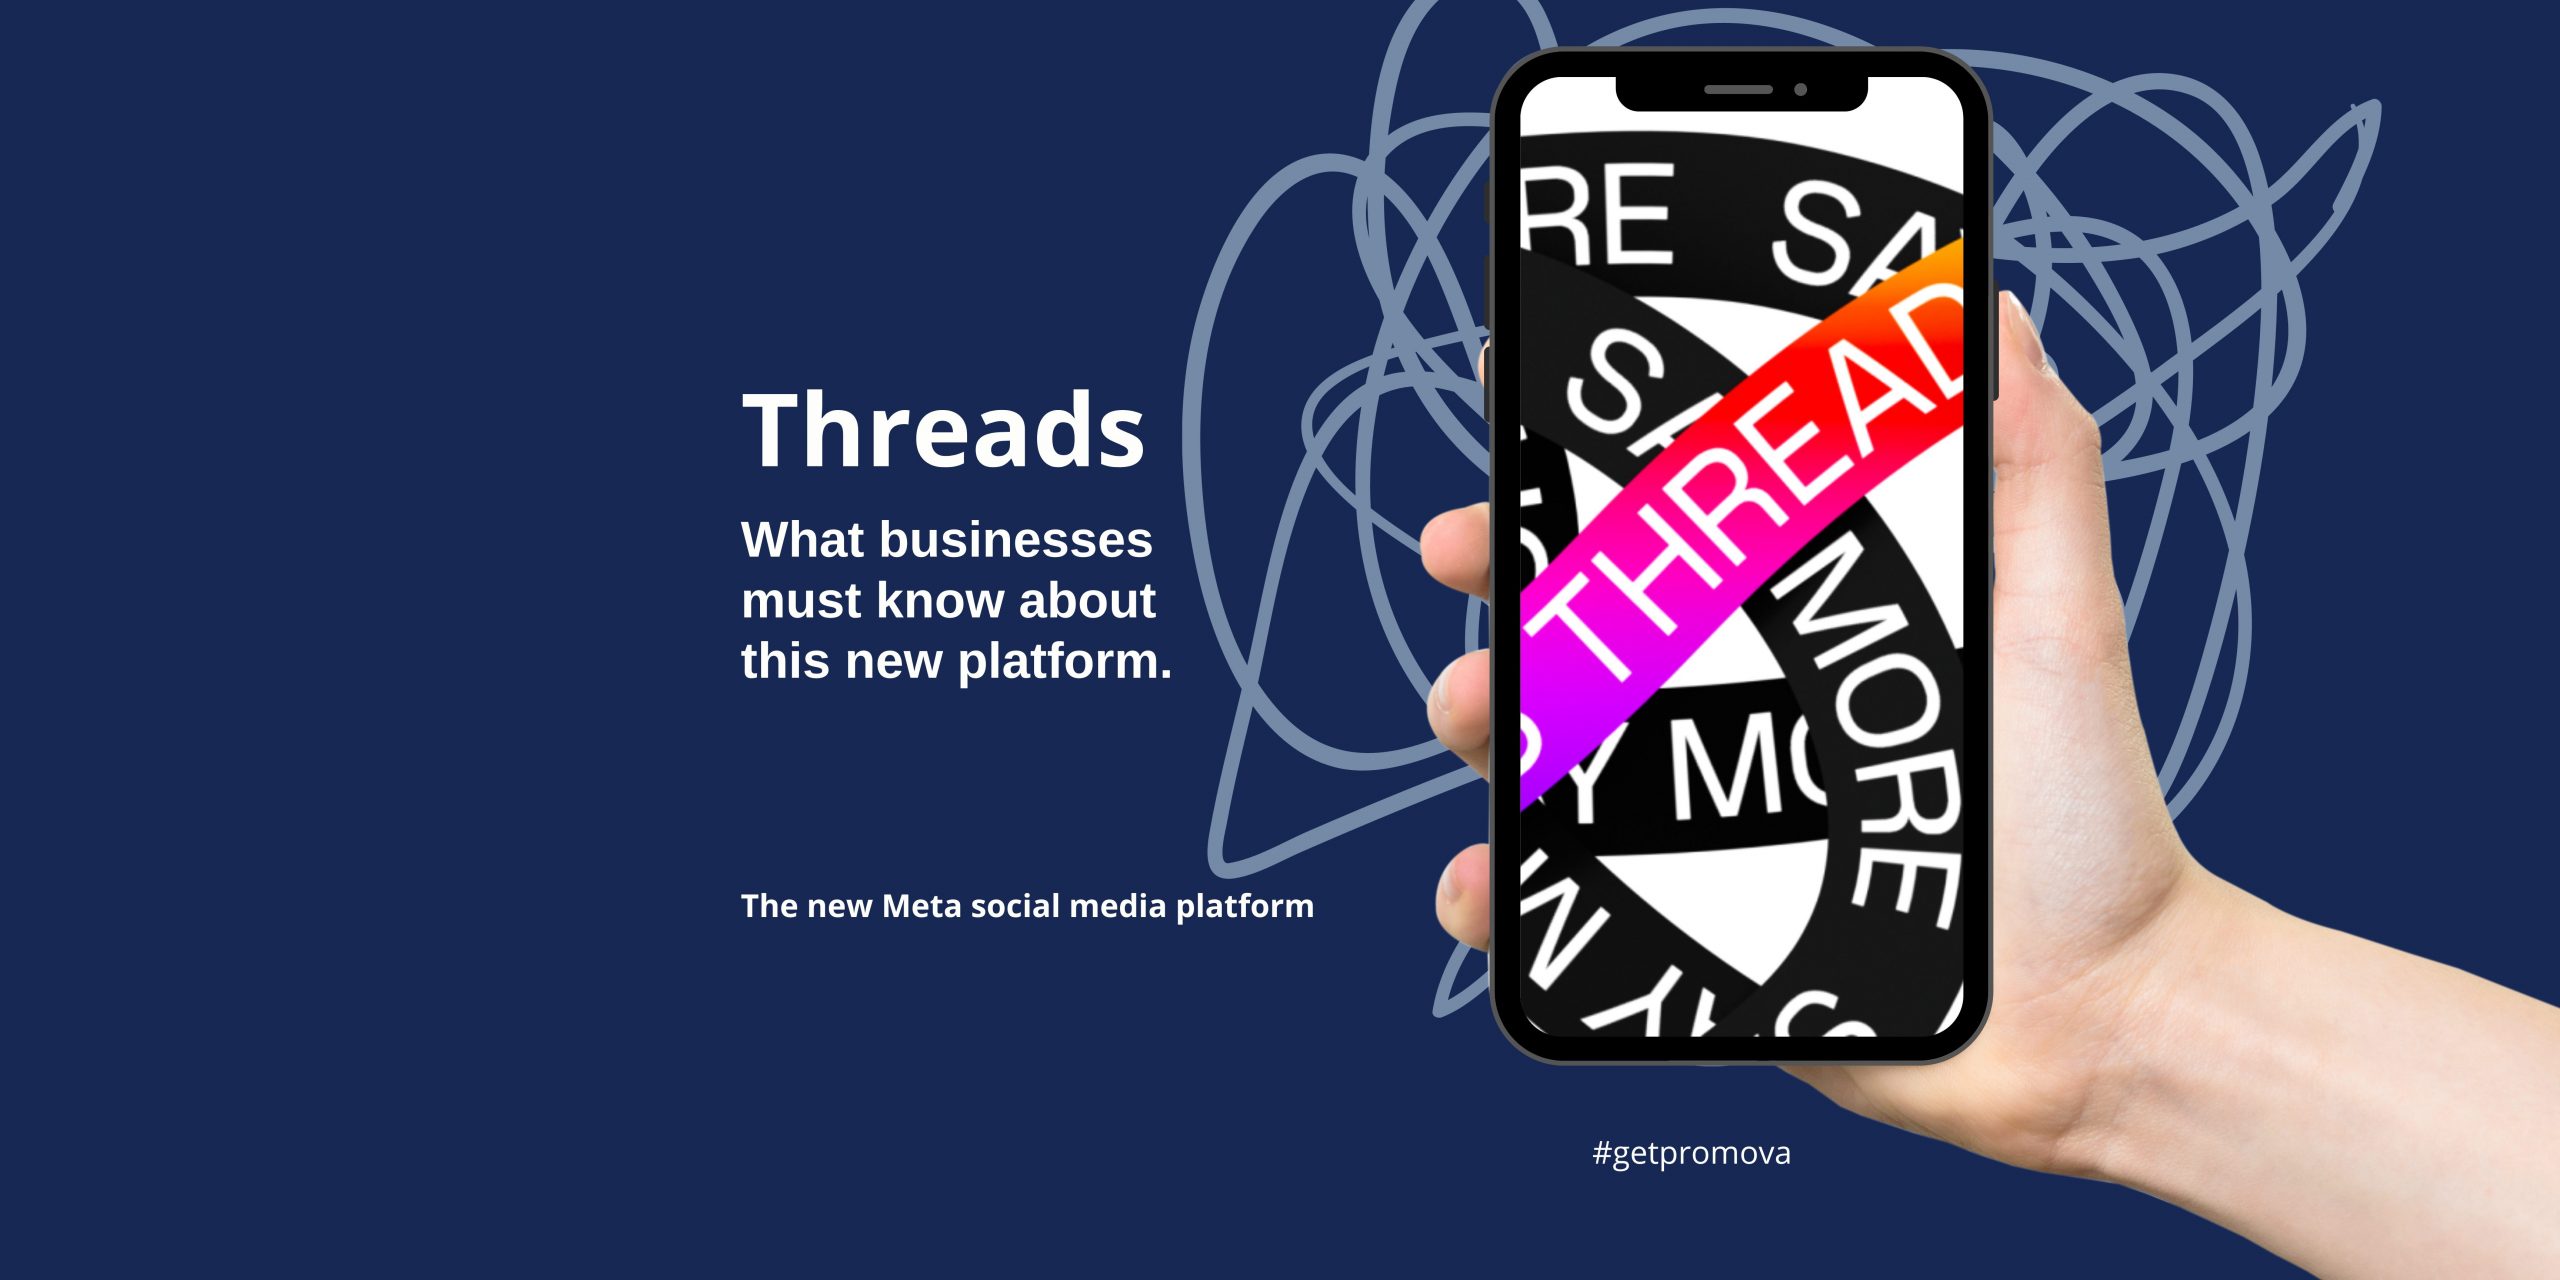 Featured image for “Threads: what businesses must know about this new platform”